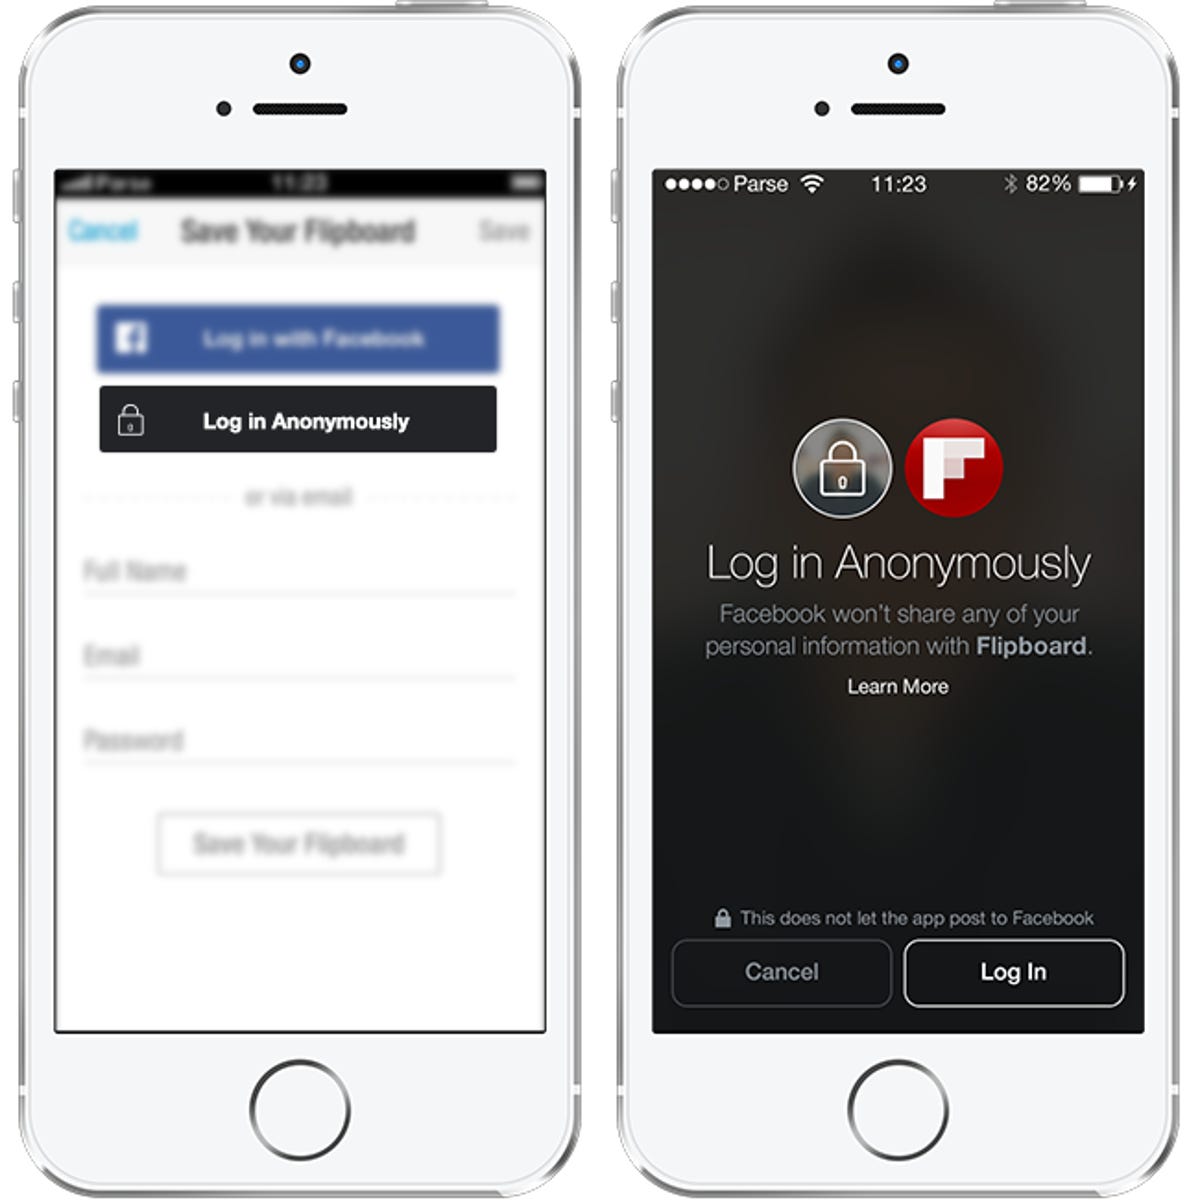 log in anonymously facebook button